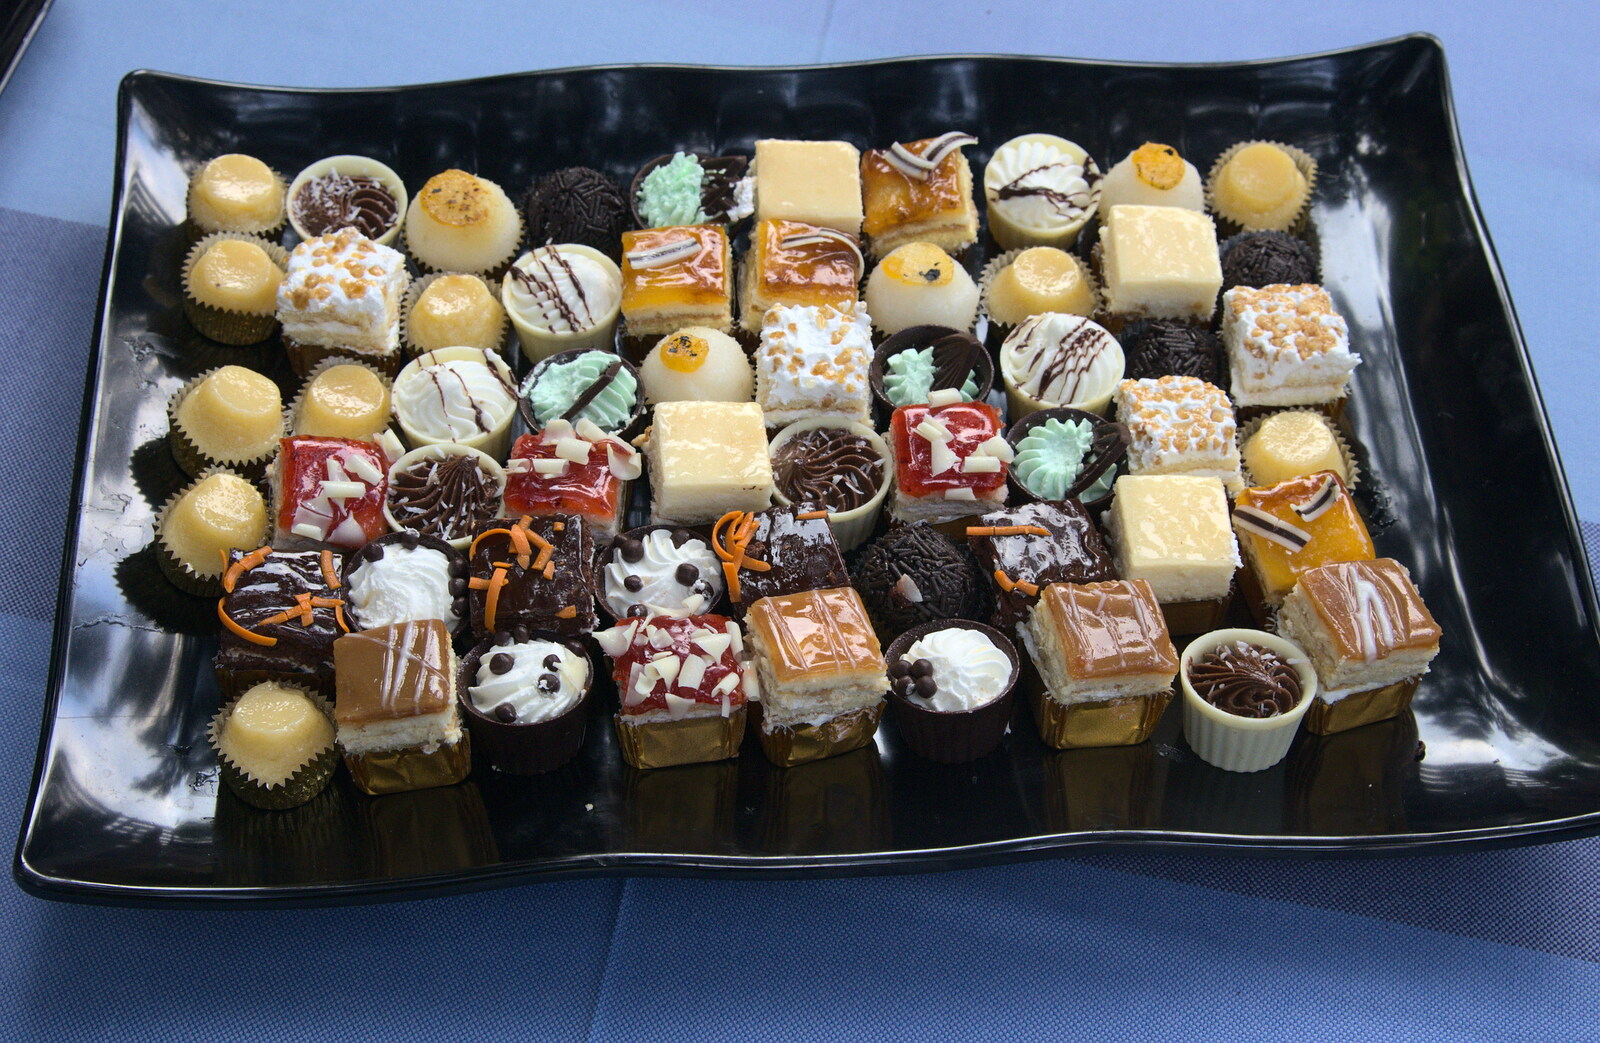 Some stunning mini cakes arrive from The Open Education Challenge, Barcelona, Catalonia - 13th July 2014